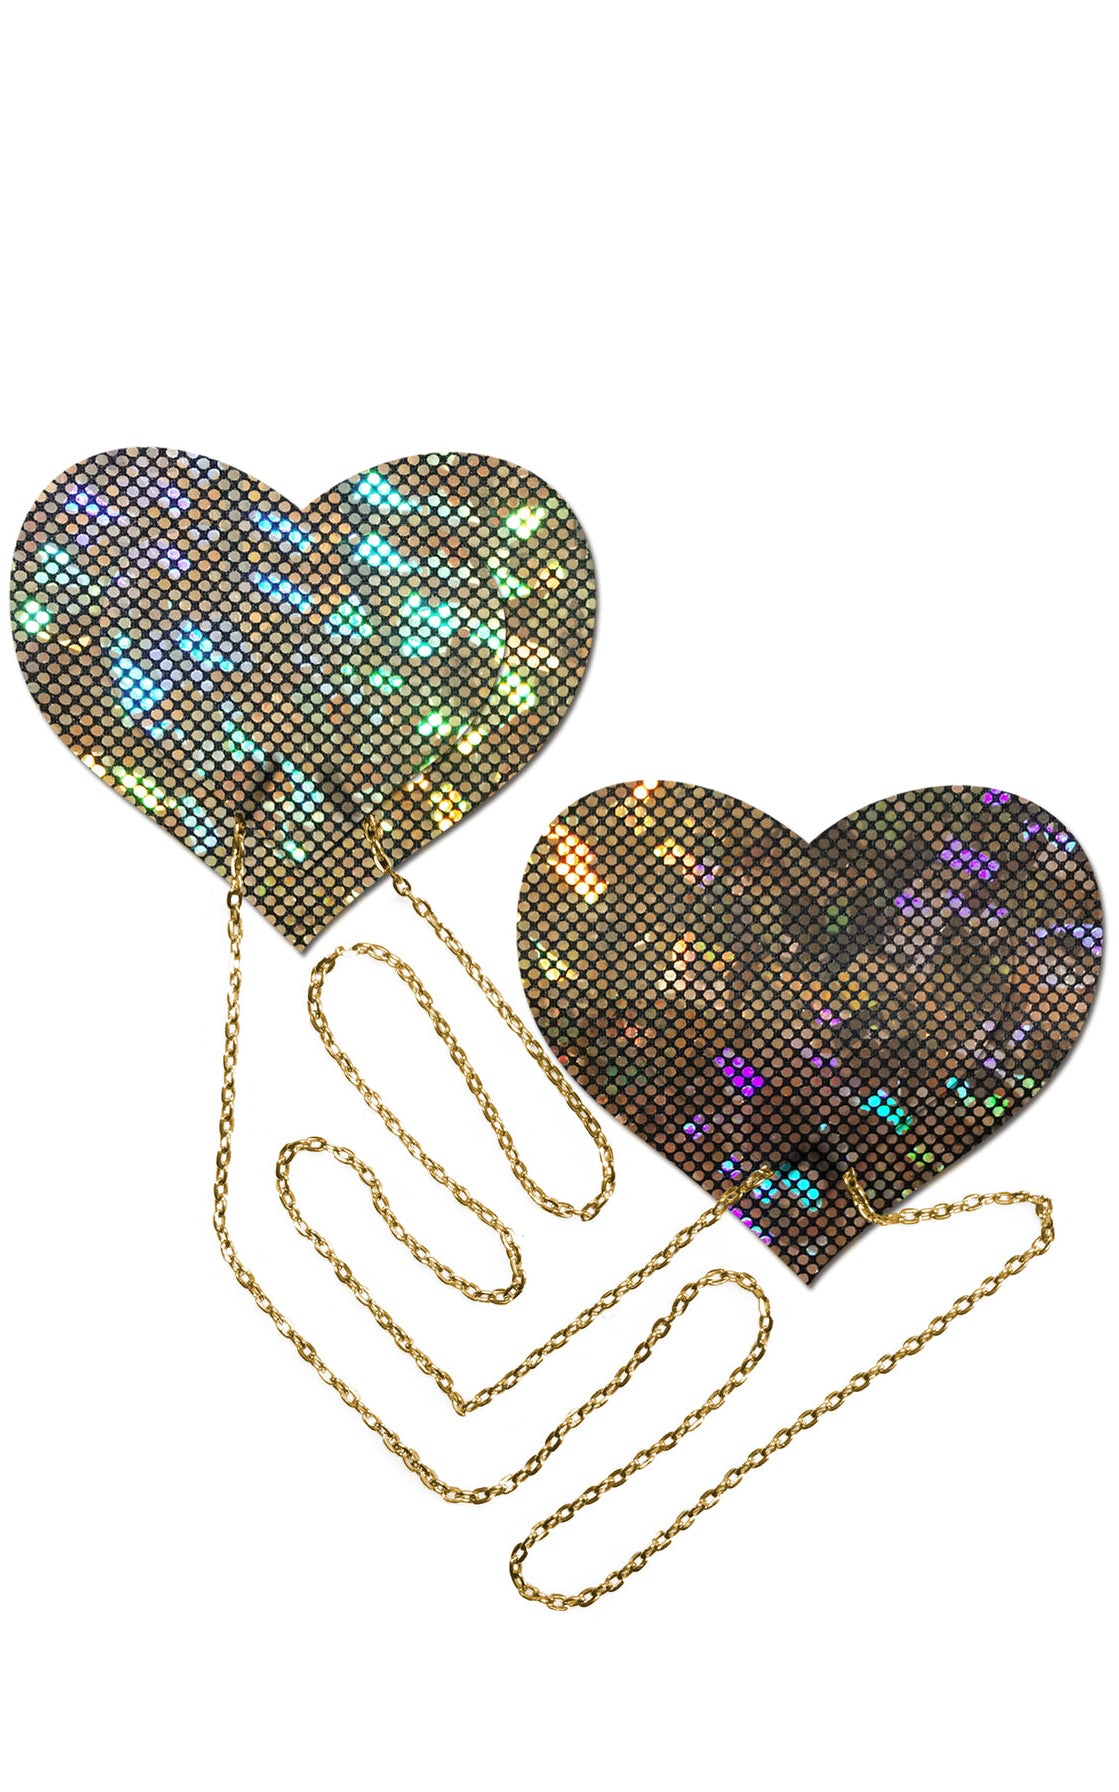 Pastease: Shattered Glass Disco Ball Gold Heart Pasties With Chains